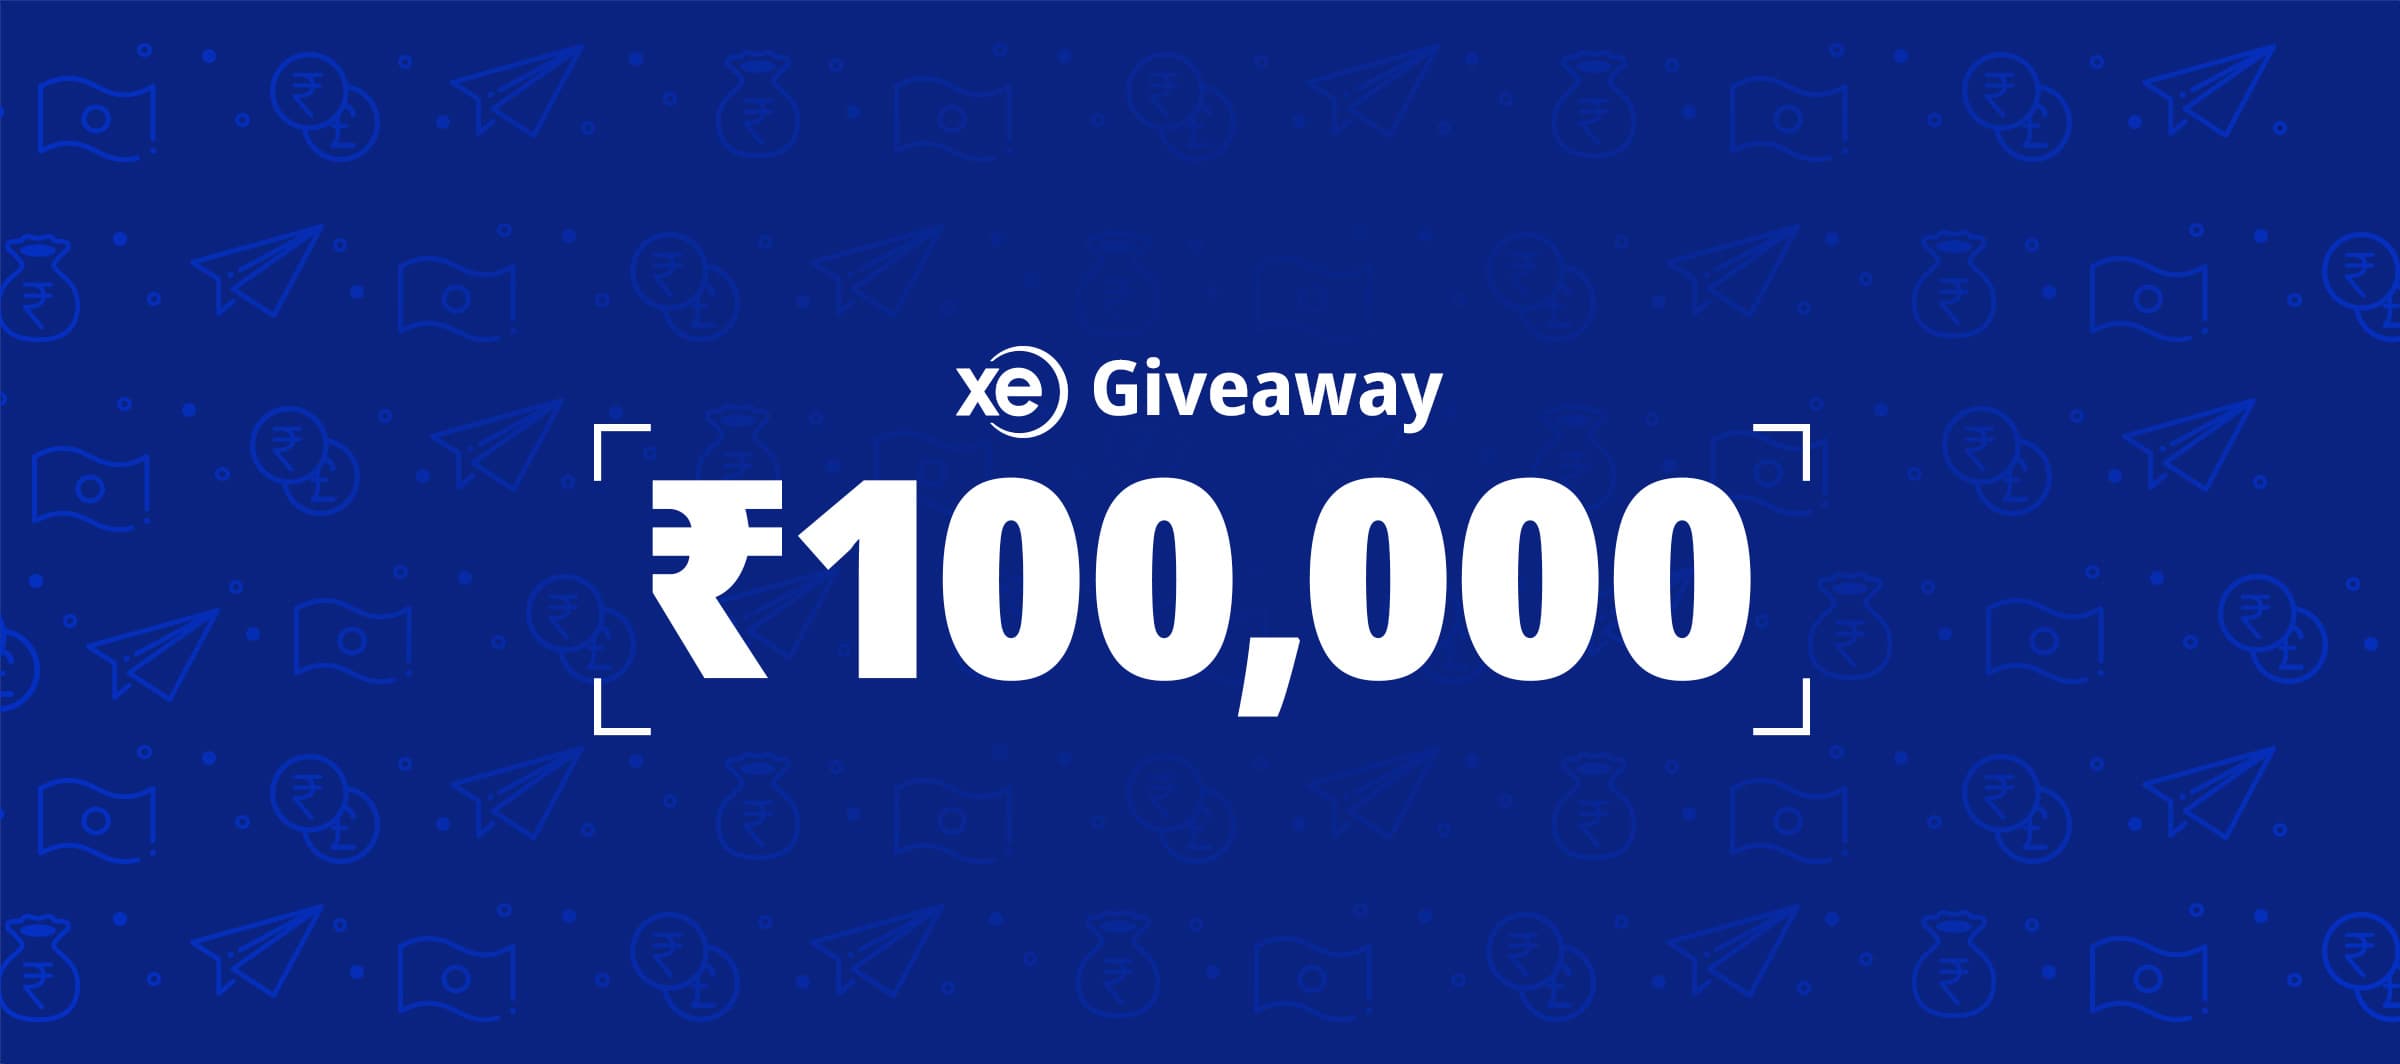 Xe Giveaway ₹100,000